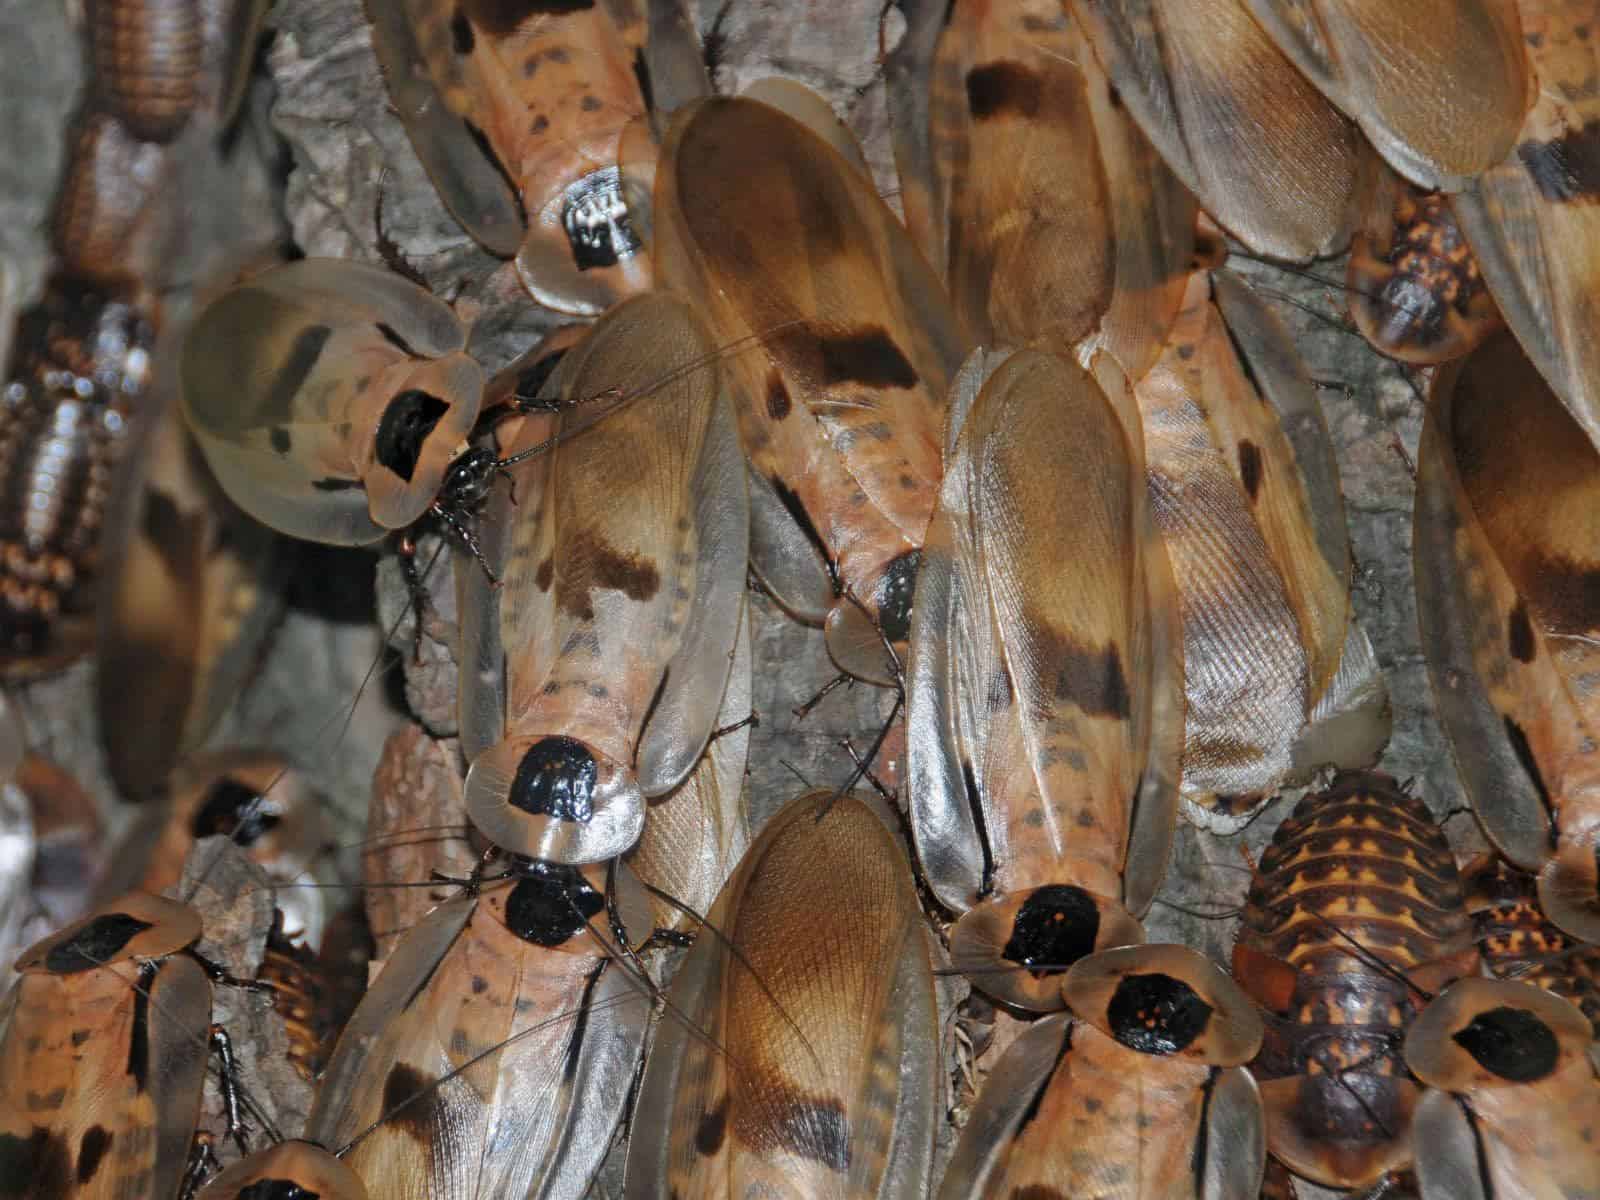 Baby cockroaches